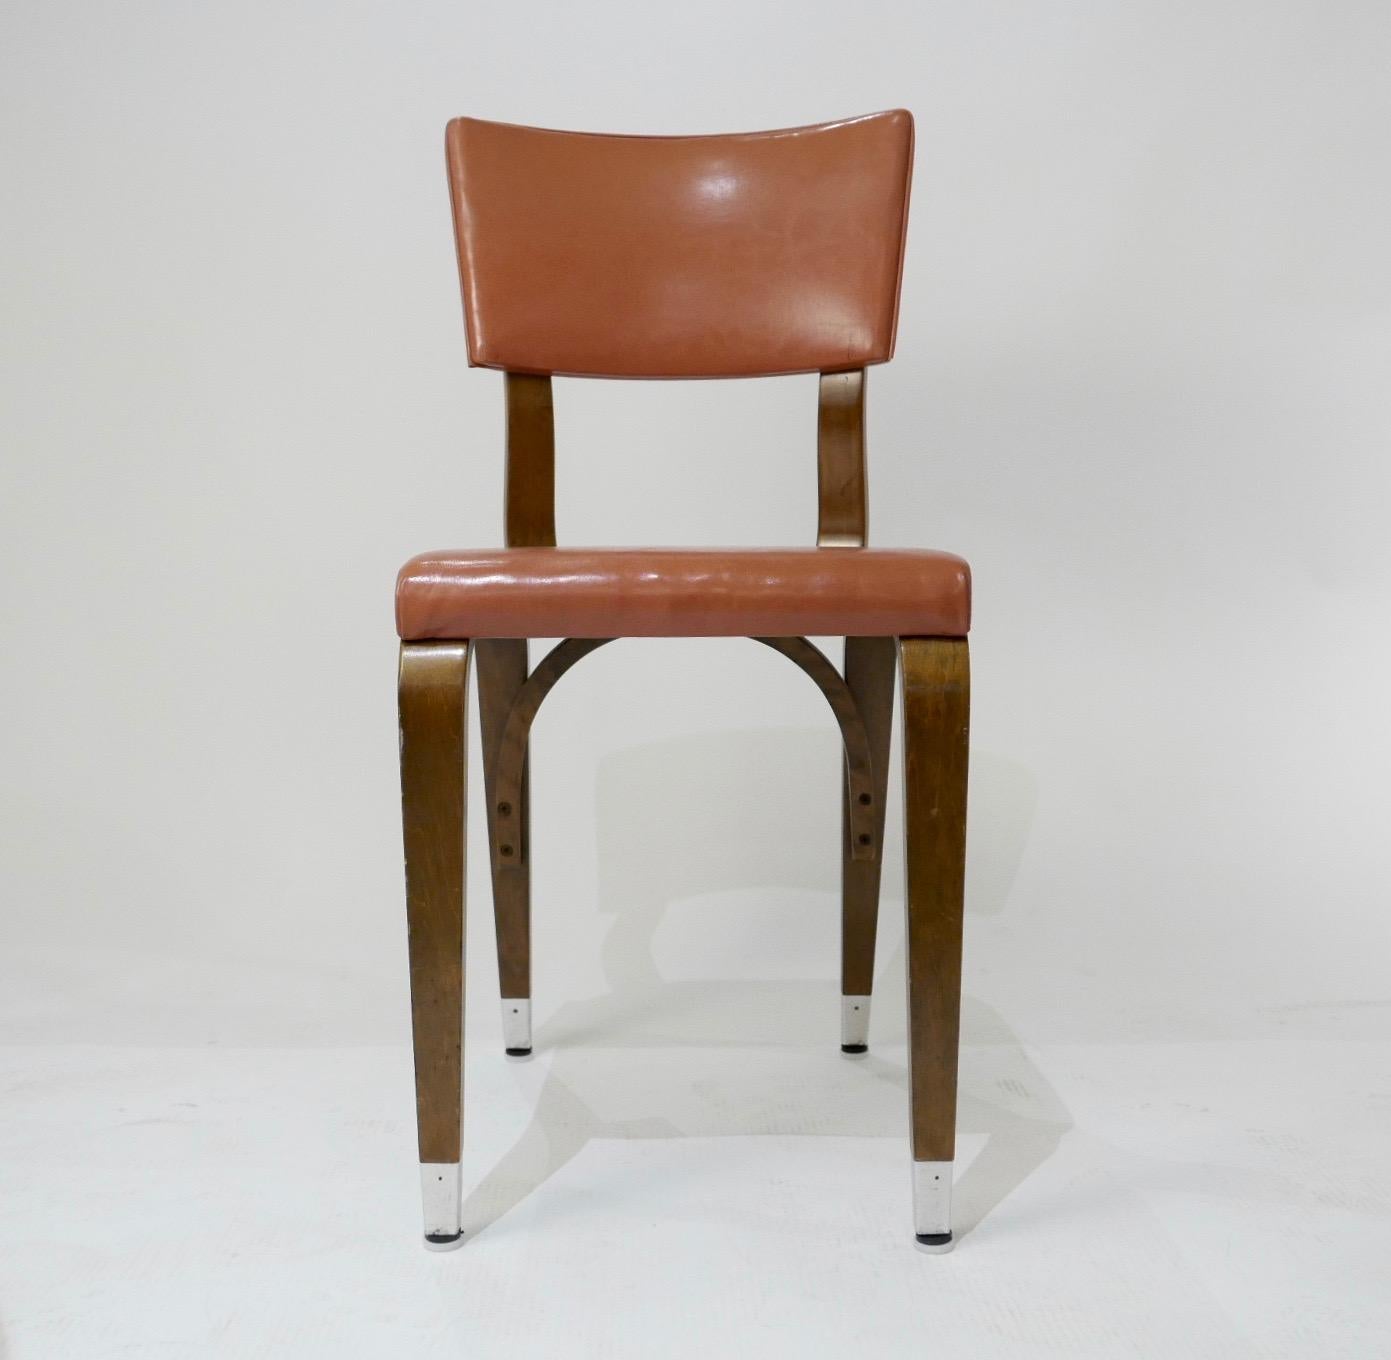 20th Century 1950s Thonet Bentwood Bent Plywood Dining, Cafe or Desk Chairs,